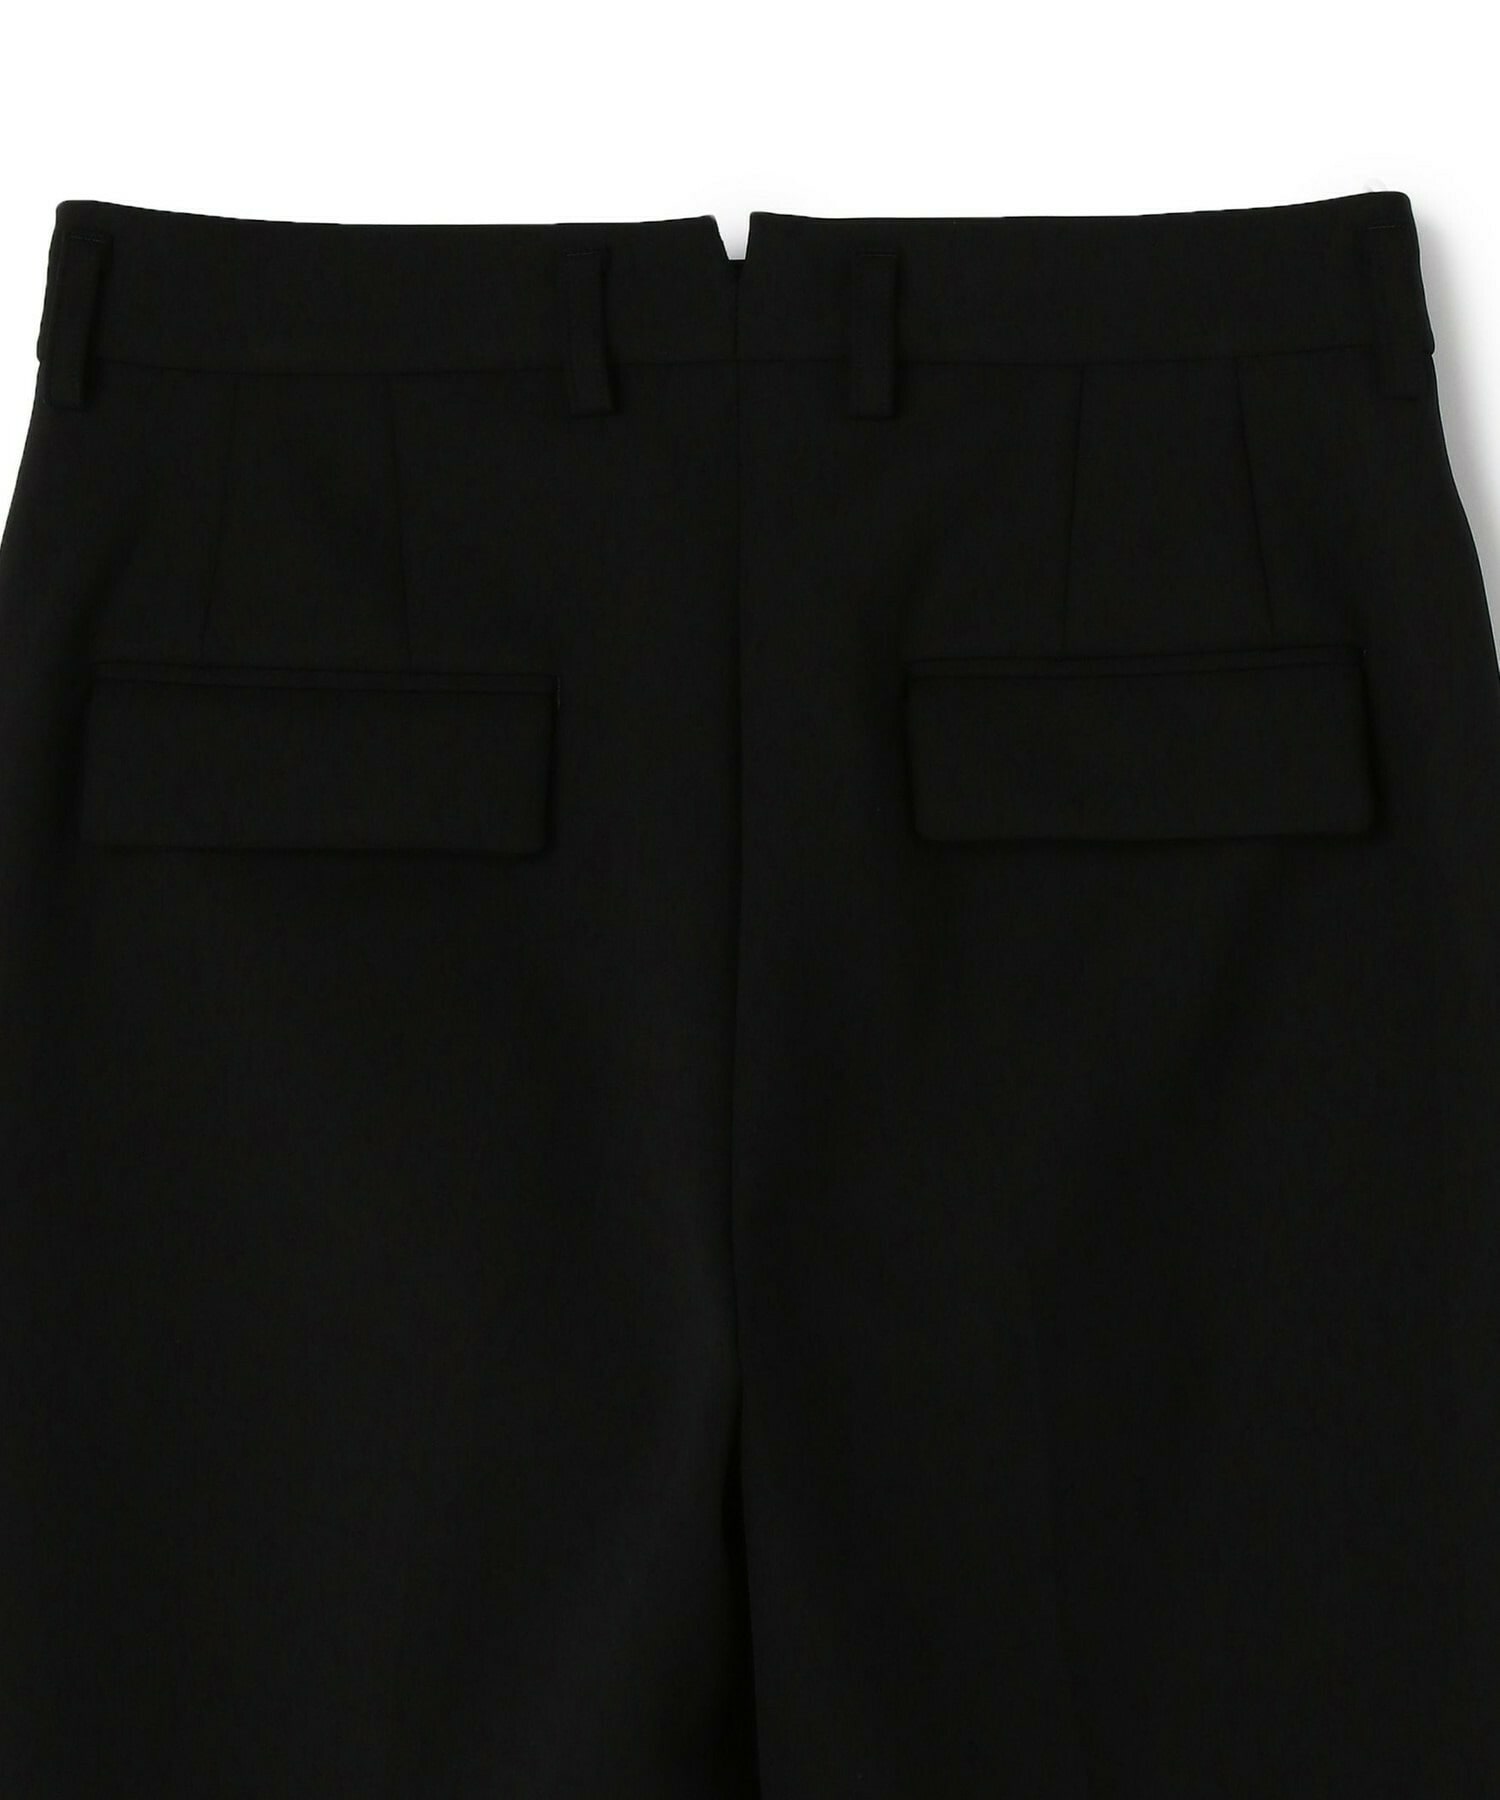 【yoshie inaba】RECYCLE NYLON DOUBLE PLEATED TAPERED  PANTS 詳細画像 ブラック 10